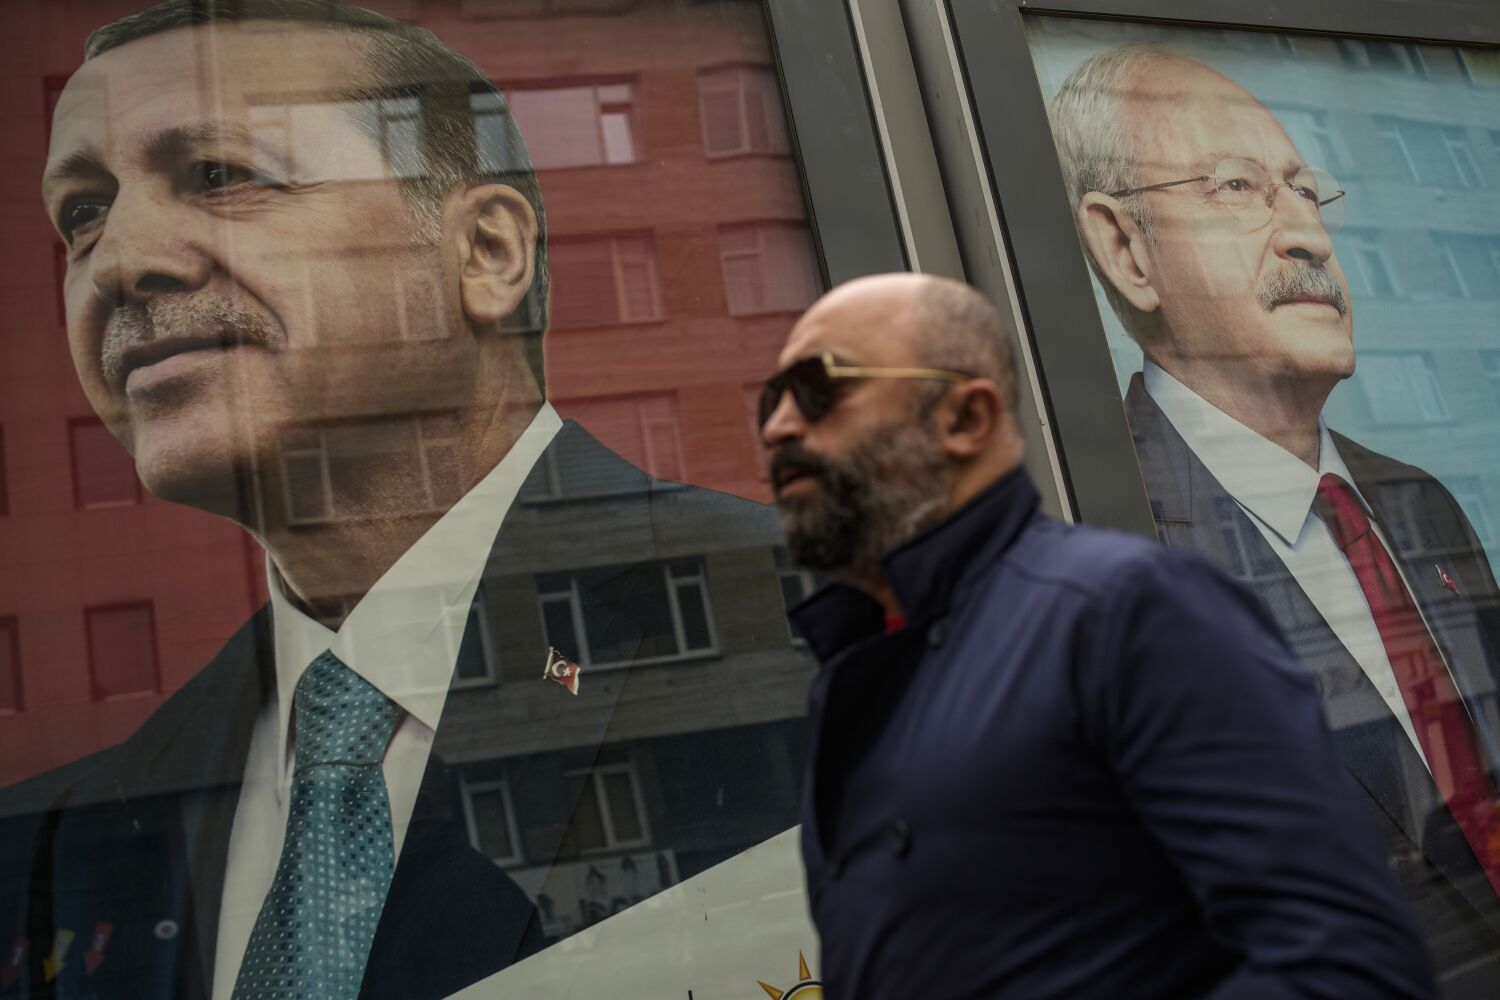 'Syrians will go!' As Turkey's election runoff nears, refugees face new threats